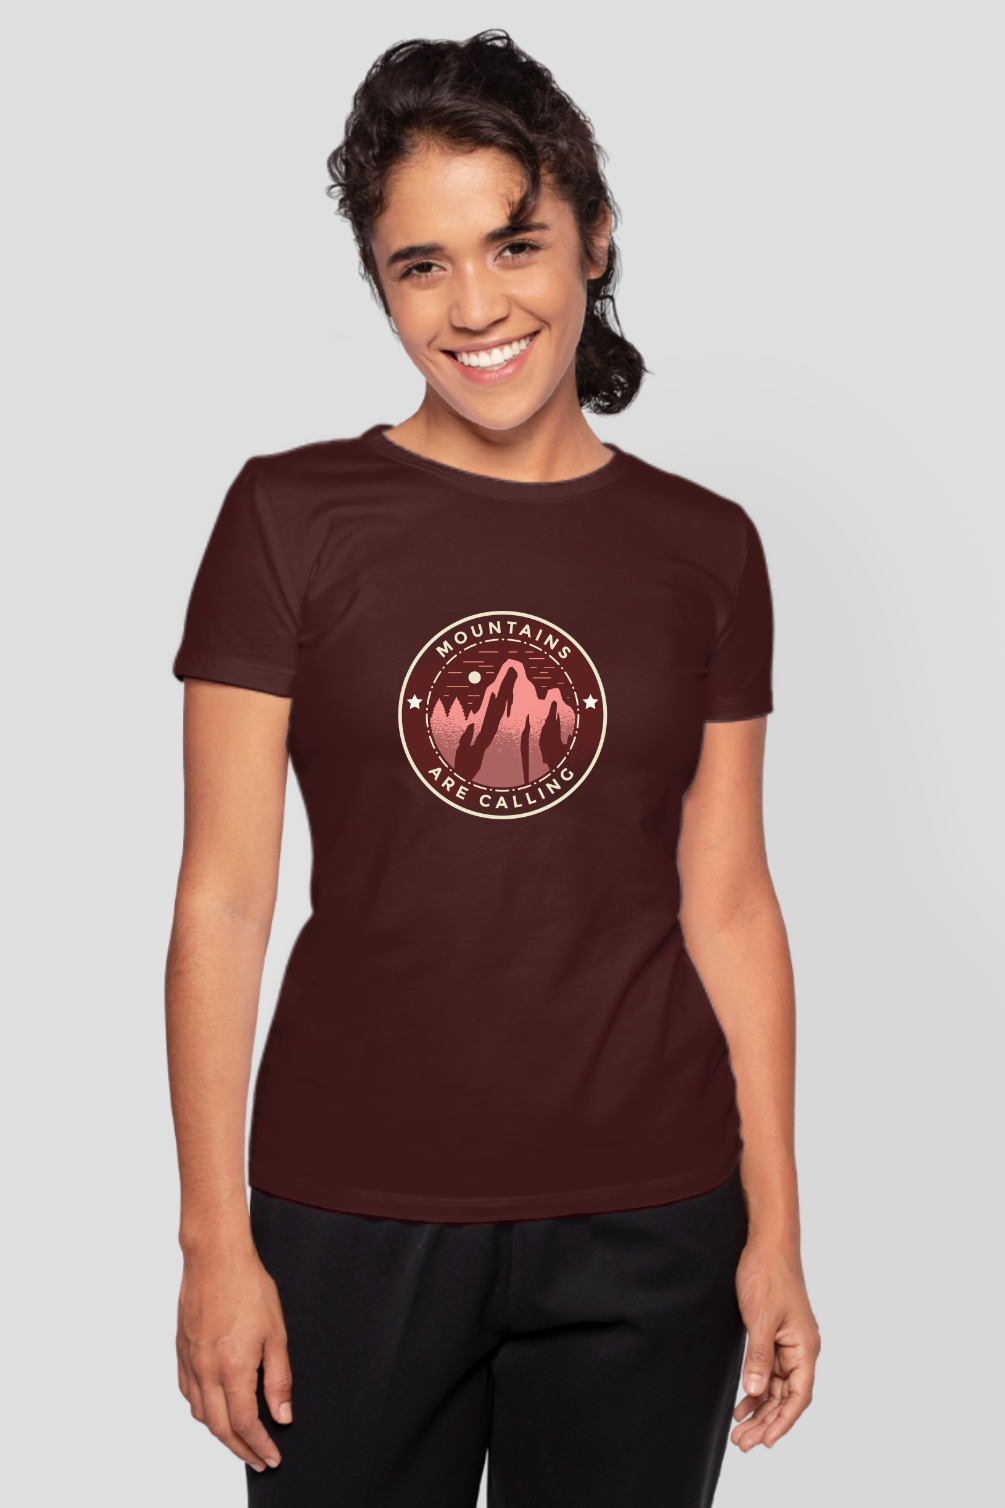 Mountains Are Calling Printed T-Shirt For Women - WowWaves - 6